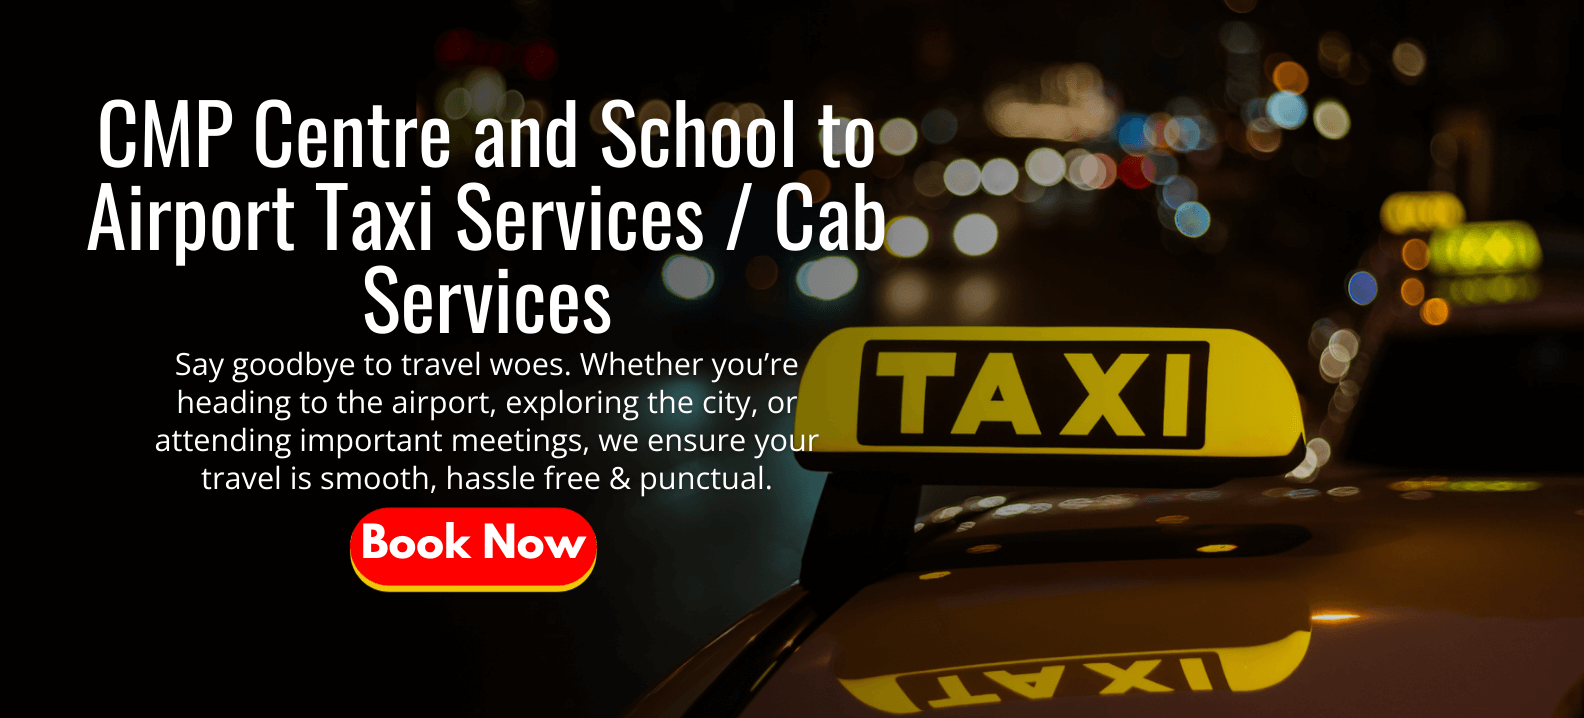 CMP Centre and School to Airport Taxi Services _ Cab Services